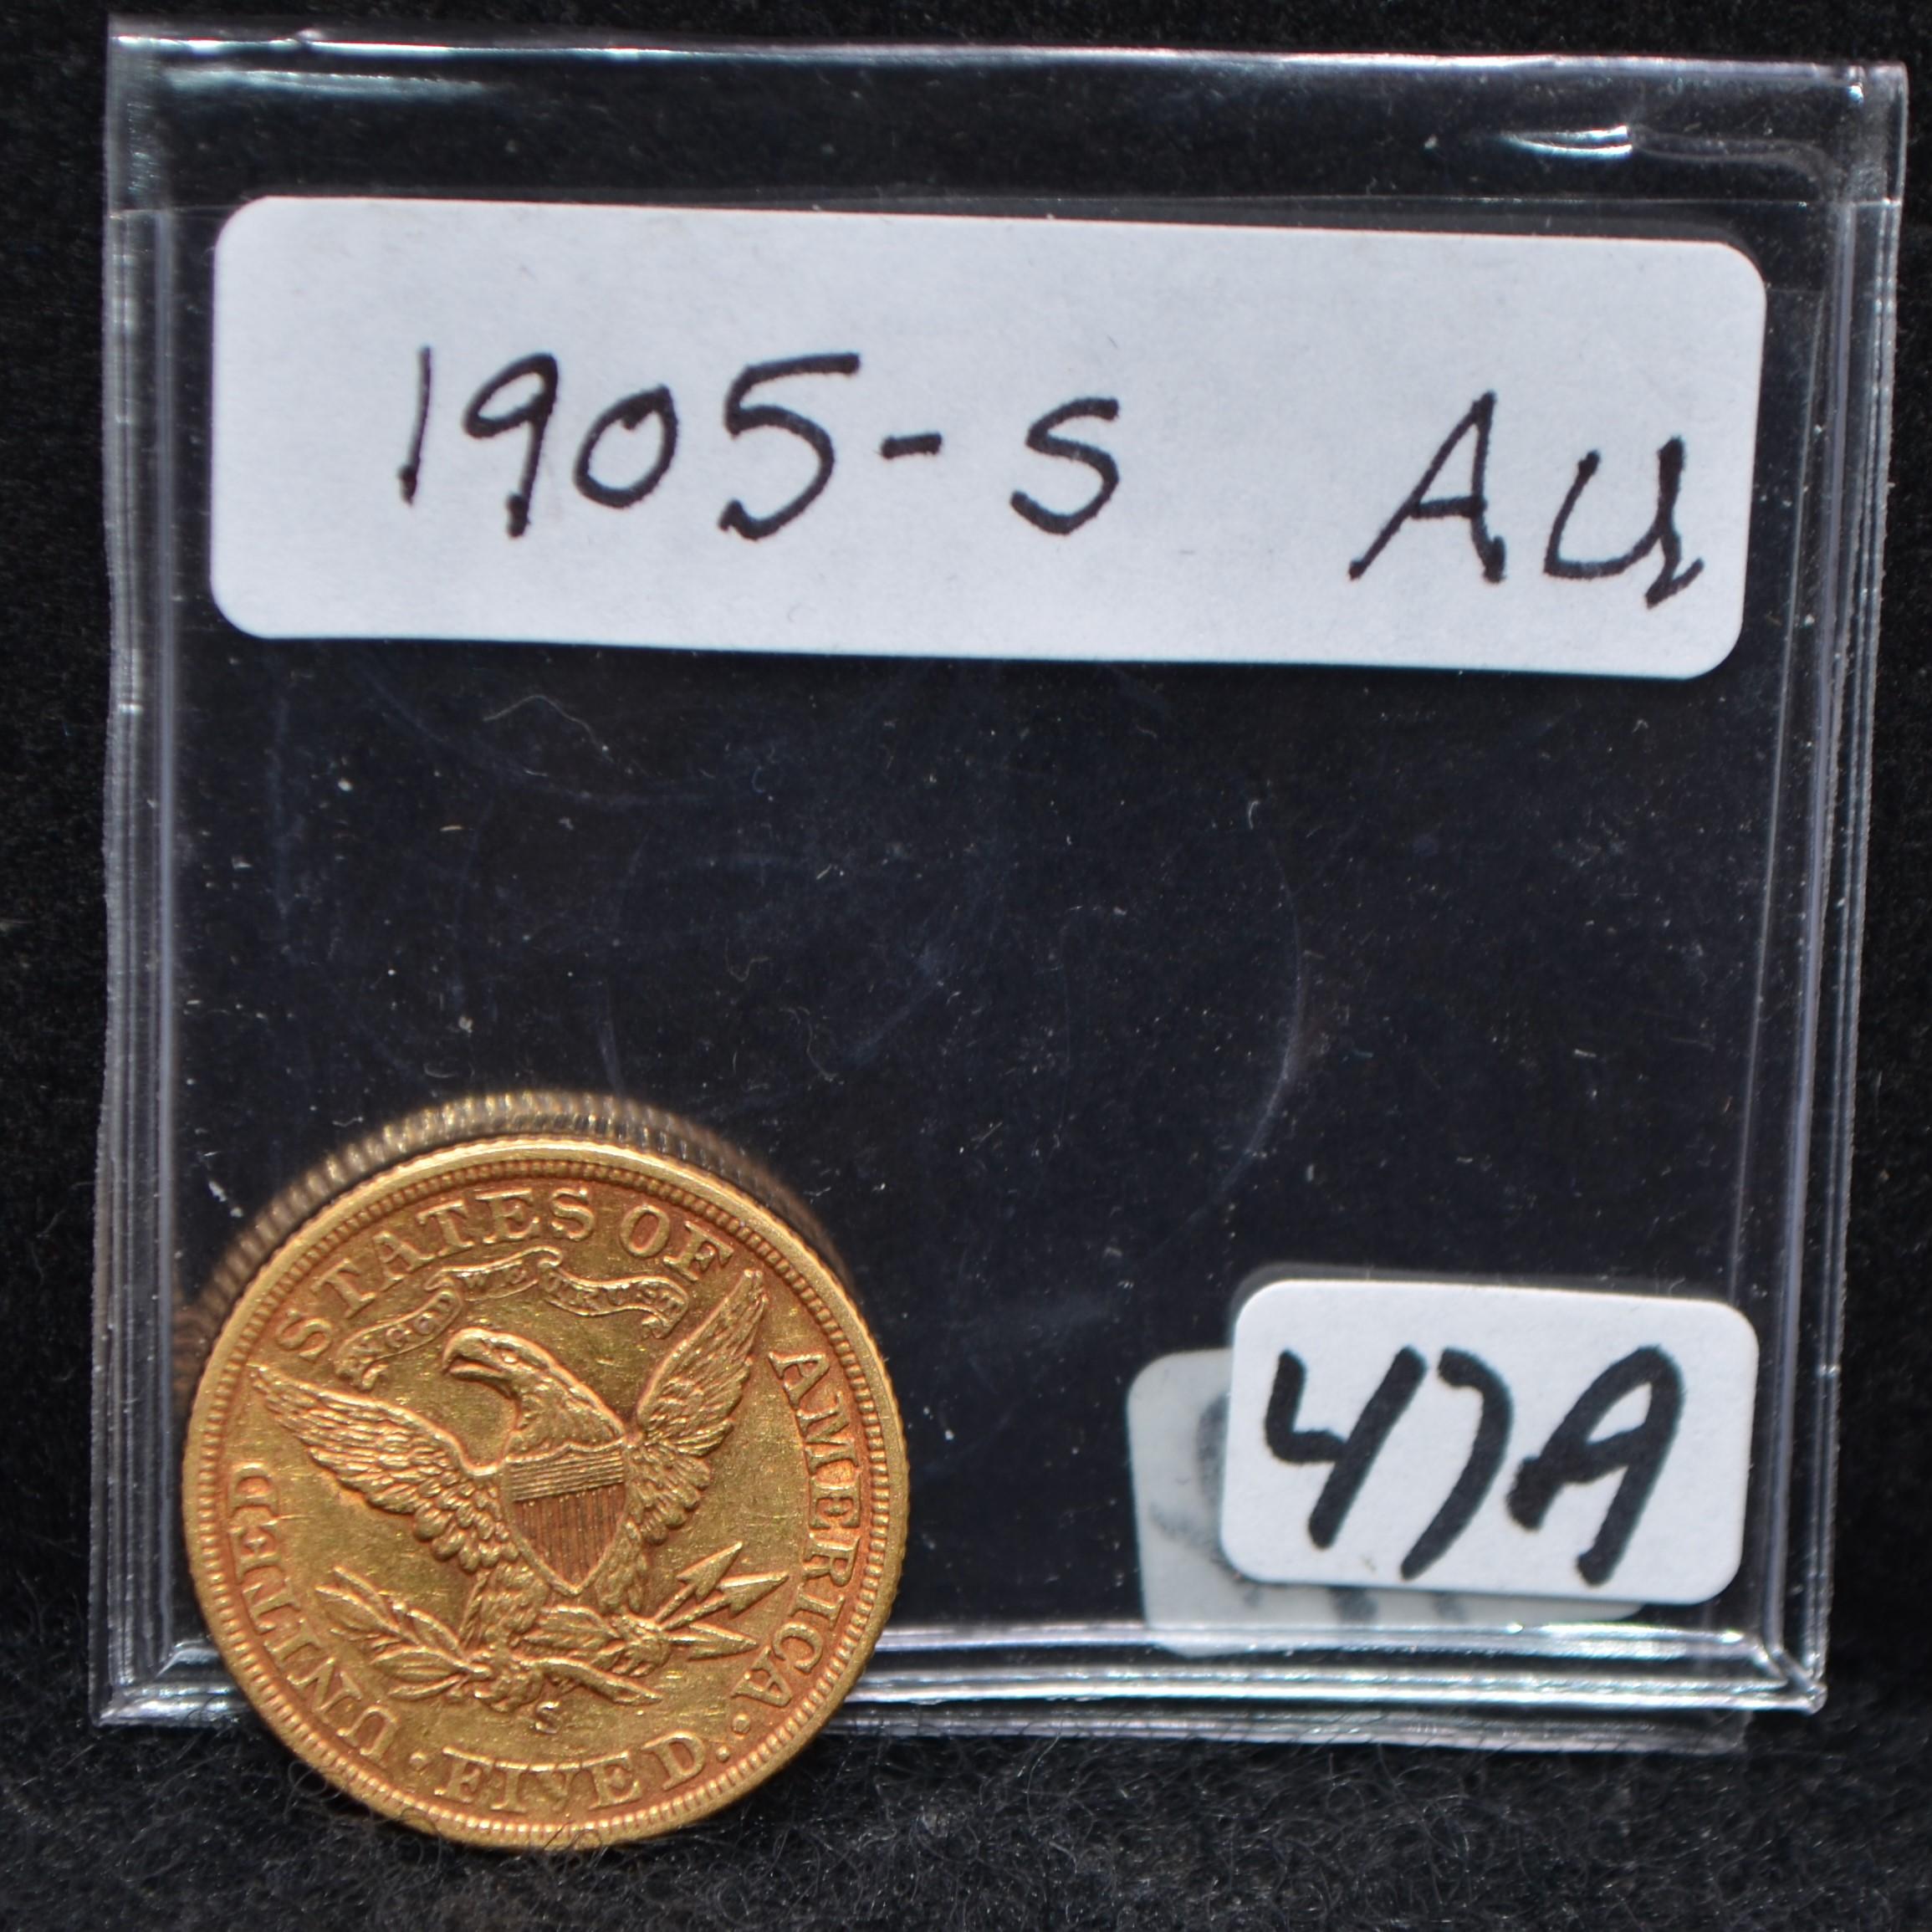 1905-S $5 LIBERTY HEAD GOLD COIN